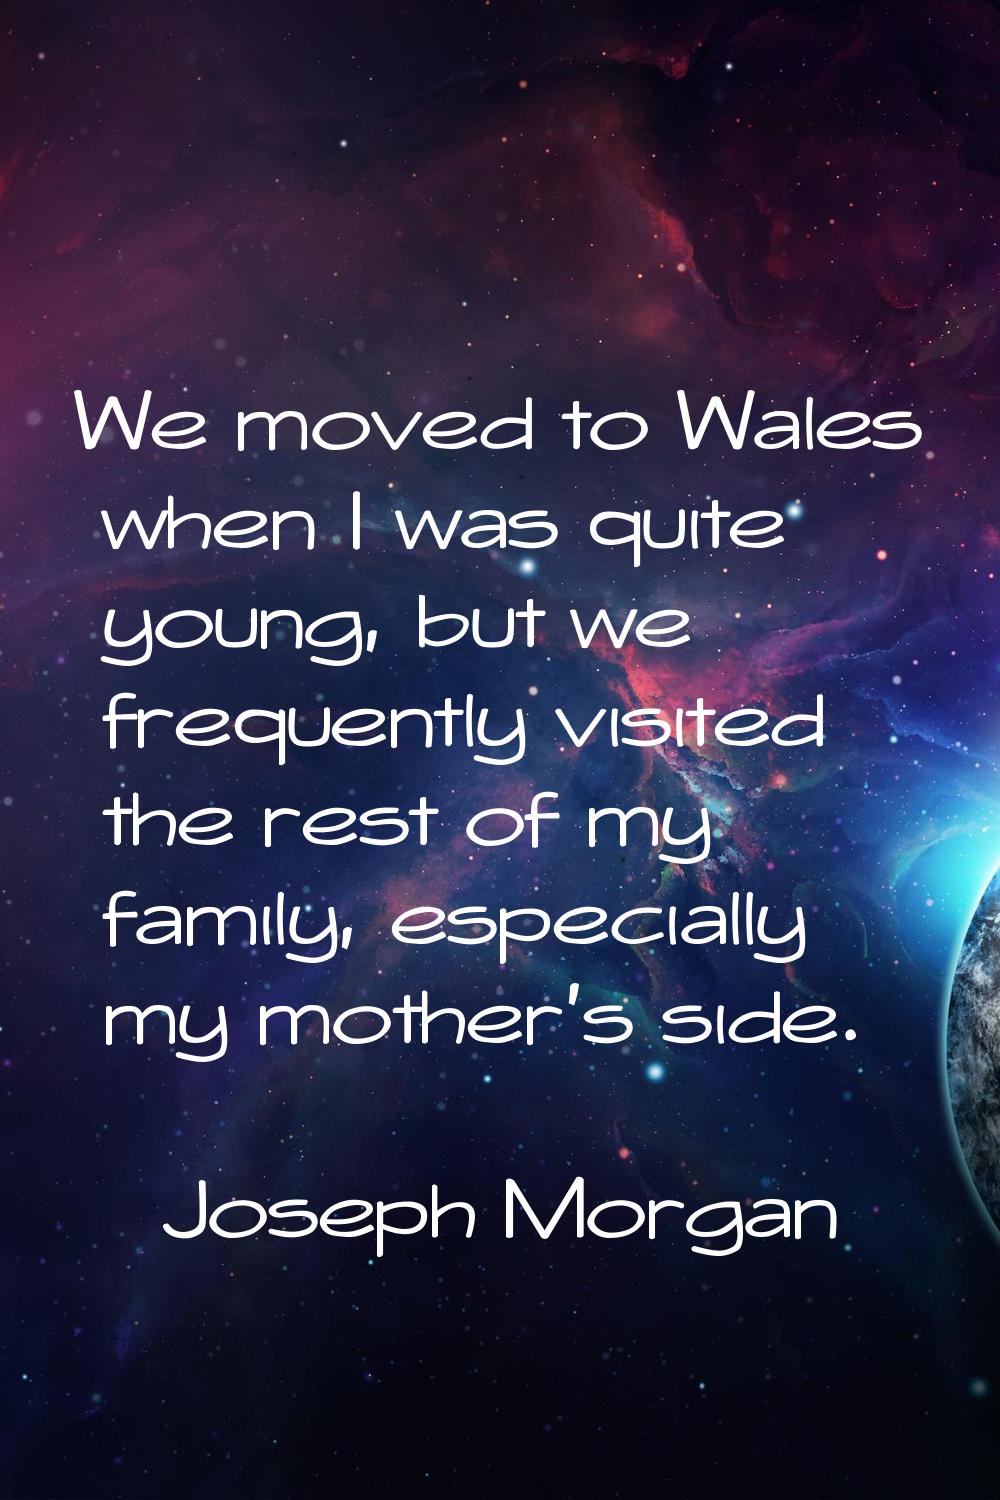 We moved to Wales when I was quite young, but we frequently visited the rest of my family, especial